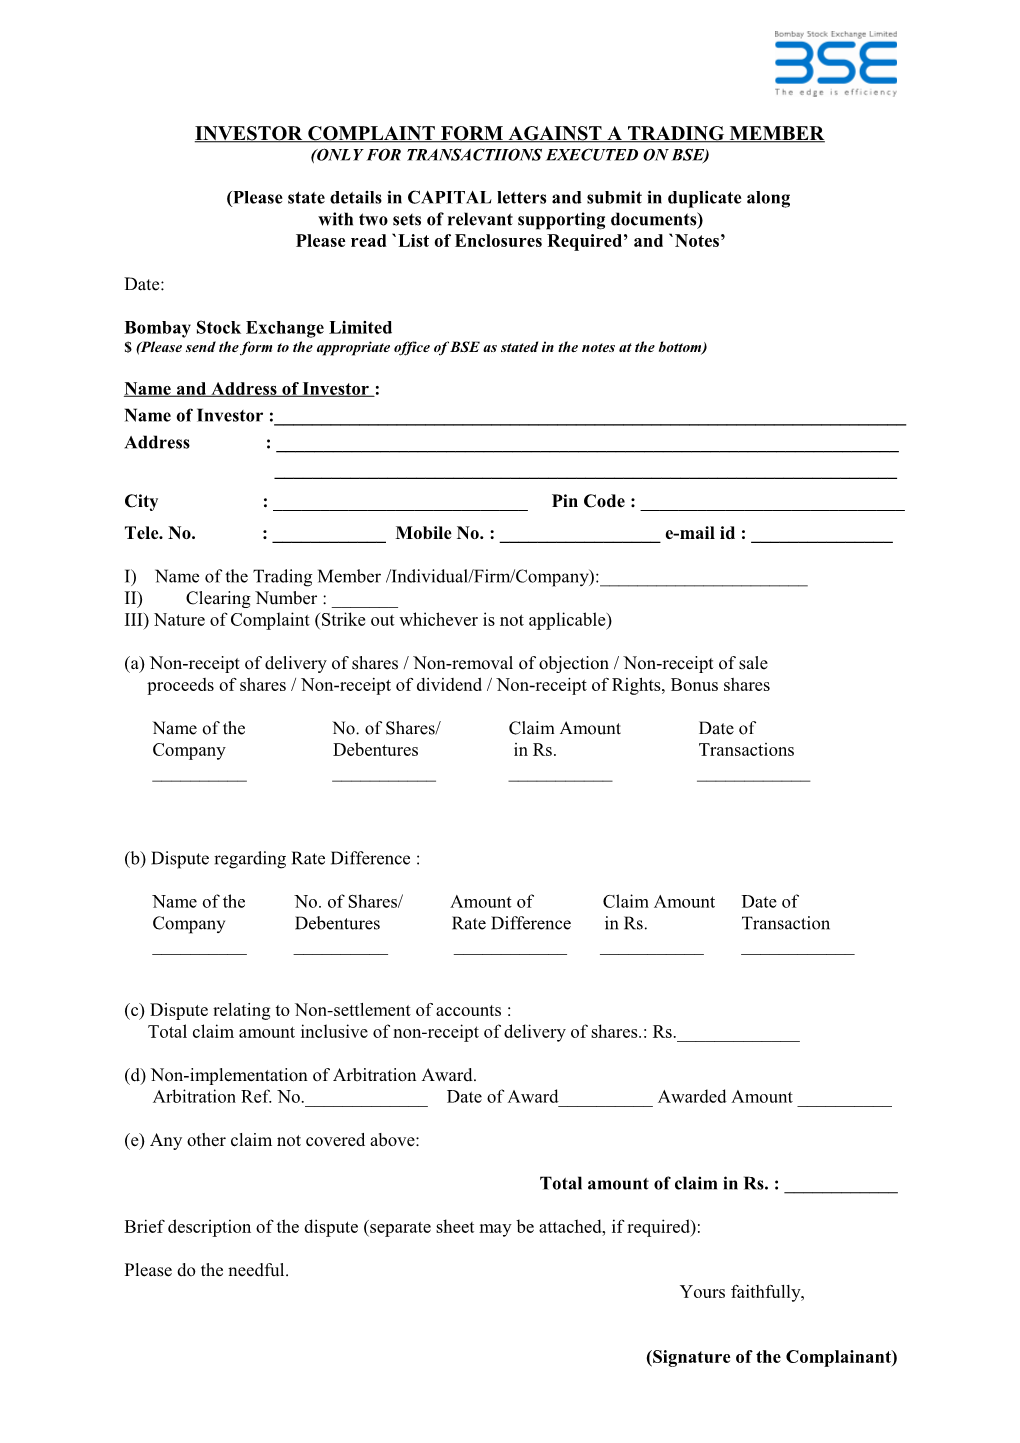 INVESTOR COMPLAINT FORM AGAINST a TRADING MEMBER